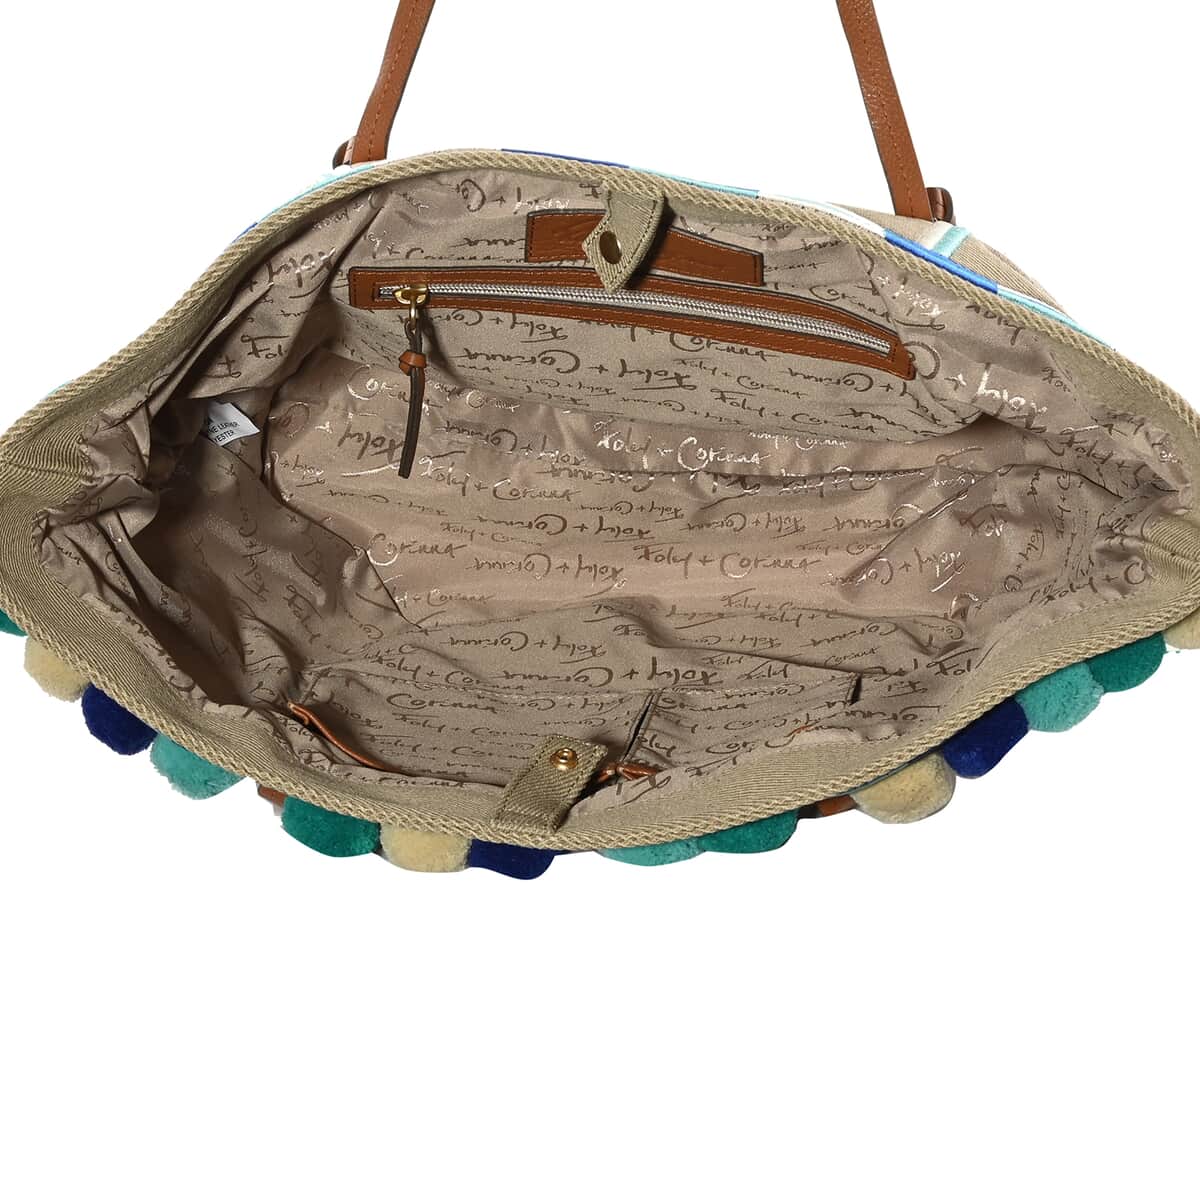 Foley & Corinna Blue Faux Leather Coconut Island Beach Tote Bag (21"x6.5"x13") image number 2